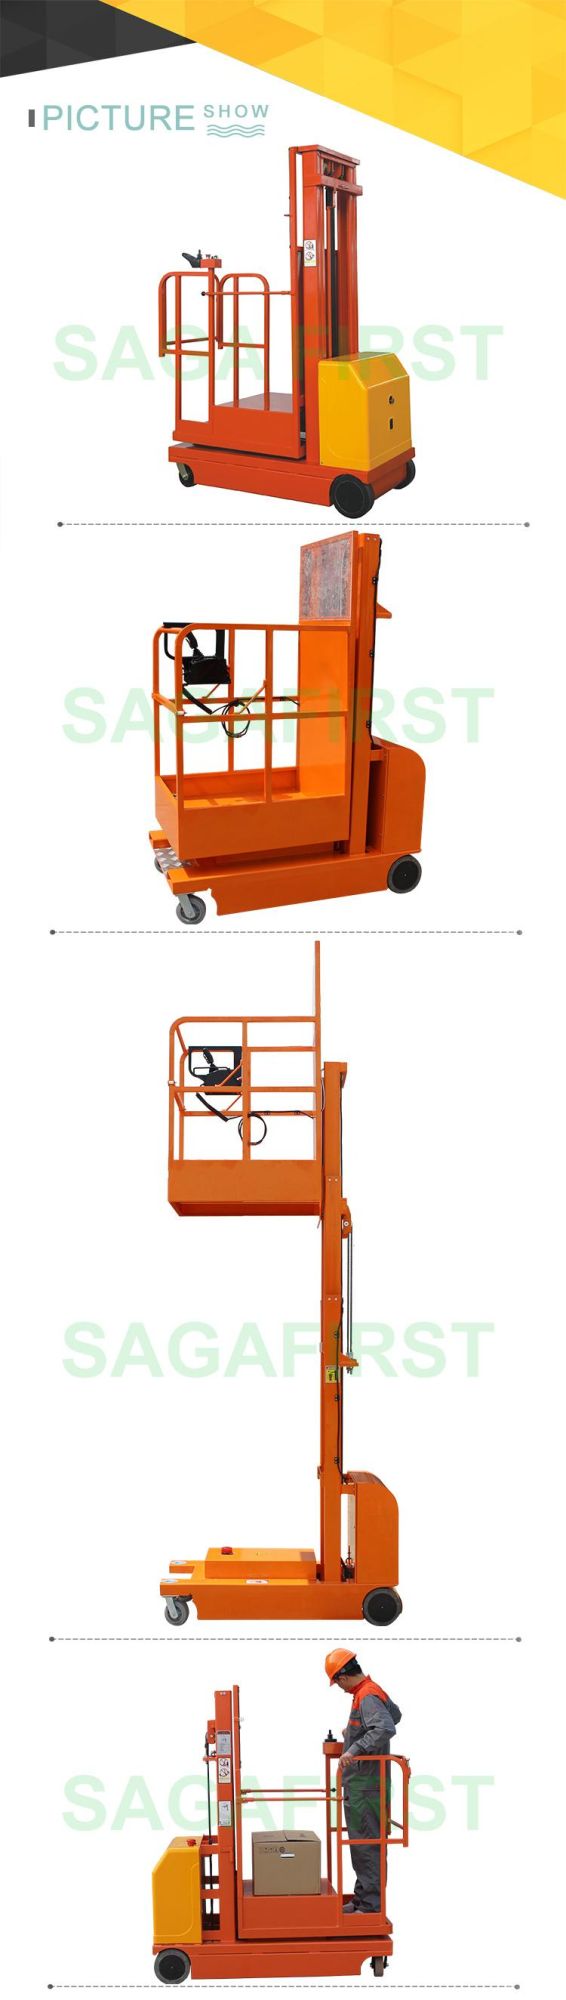 Electric Vertical Lift Hydraulic Self Propelled Order Picker